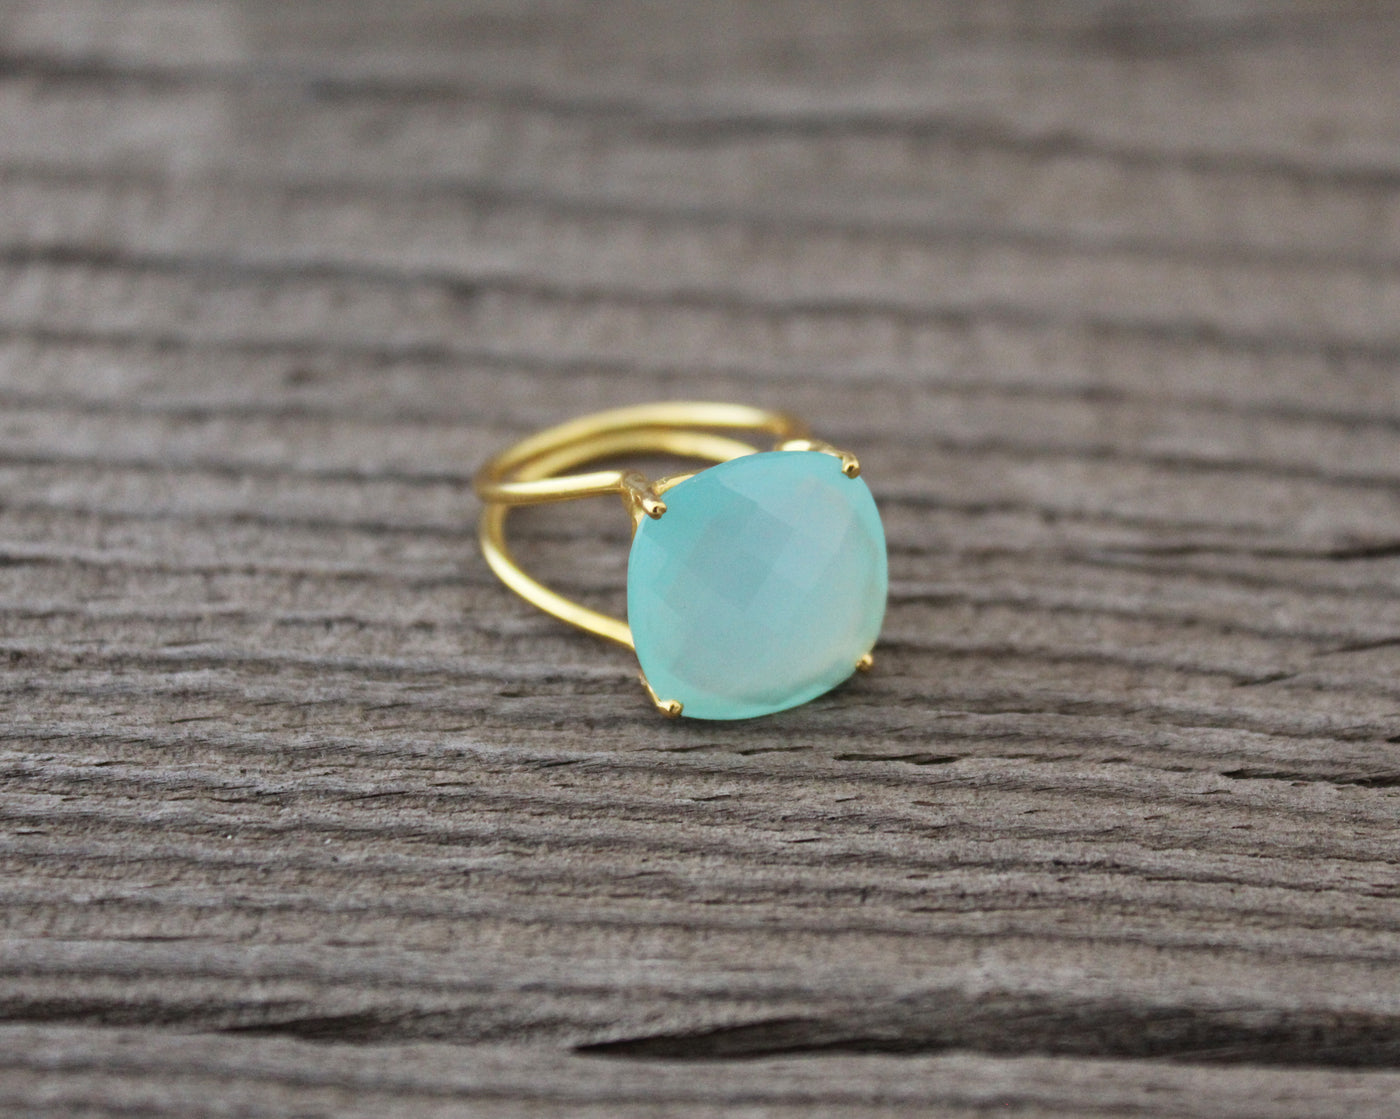 Aqua Chalcedony Ring, 14K Gold Vermeil Jewelry, Blue Stone Ring, Minimalist Ring, Rings for Women, March Birthstone, Briolette Cushion Ring